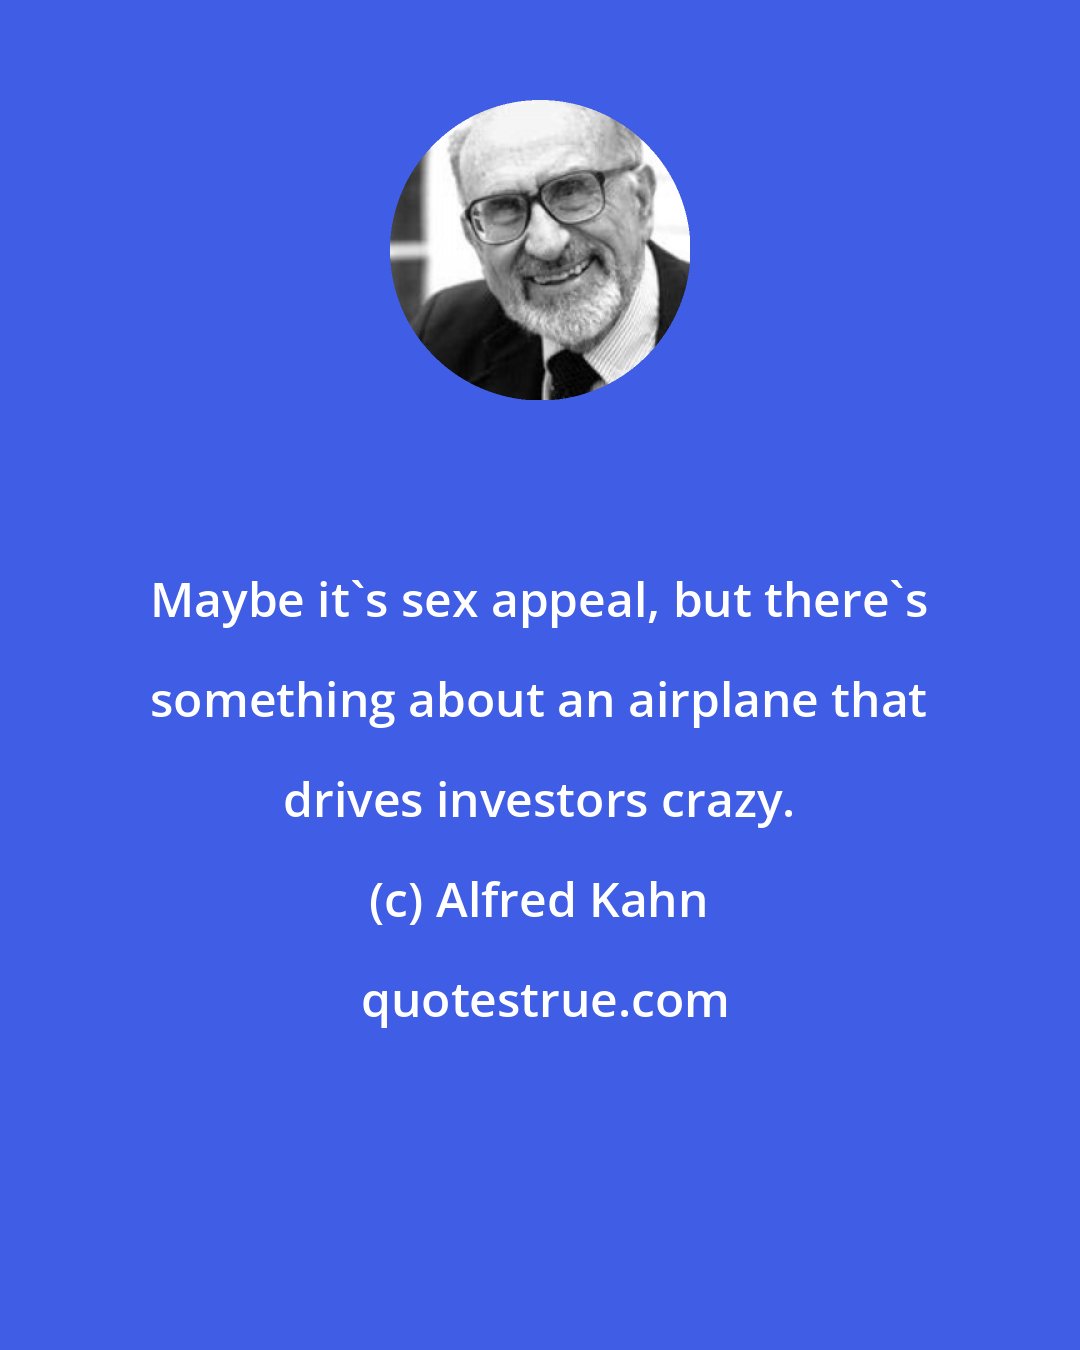 Alfred Kahn: Maybe it's sex appeal, but there's something about an airplane that drives investors crazy.